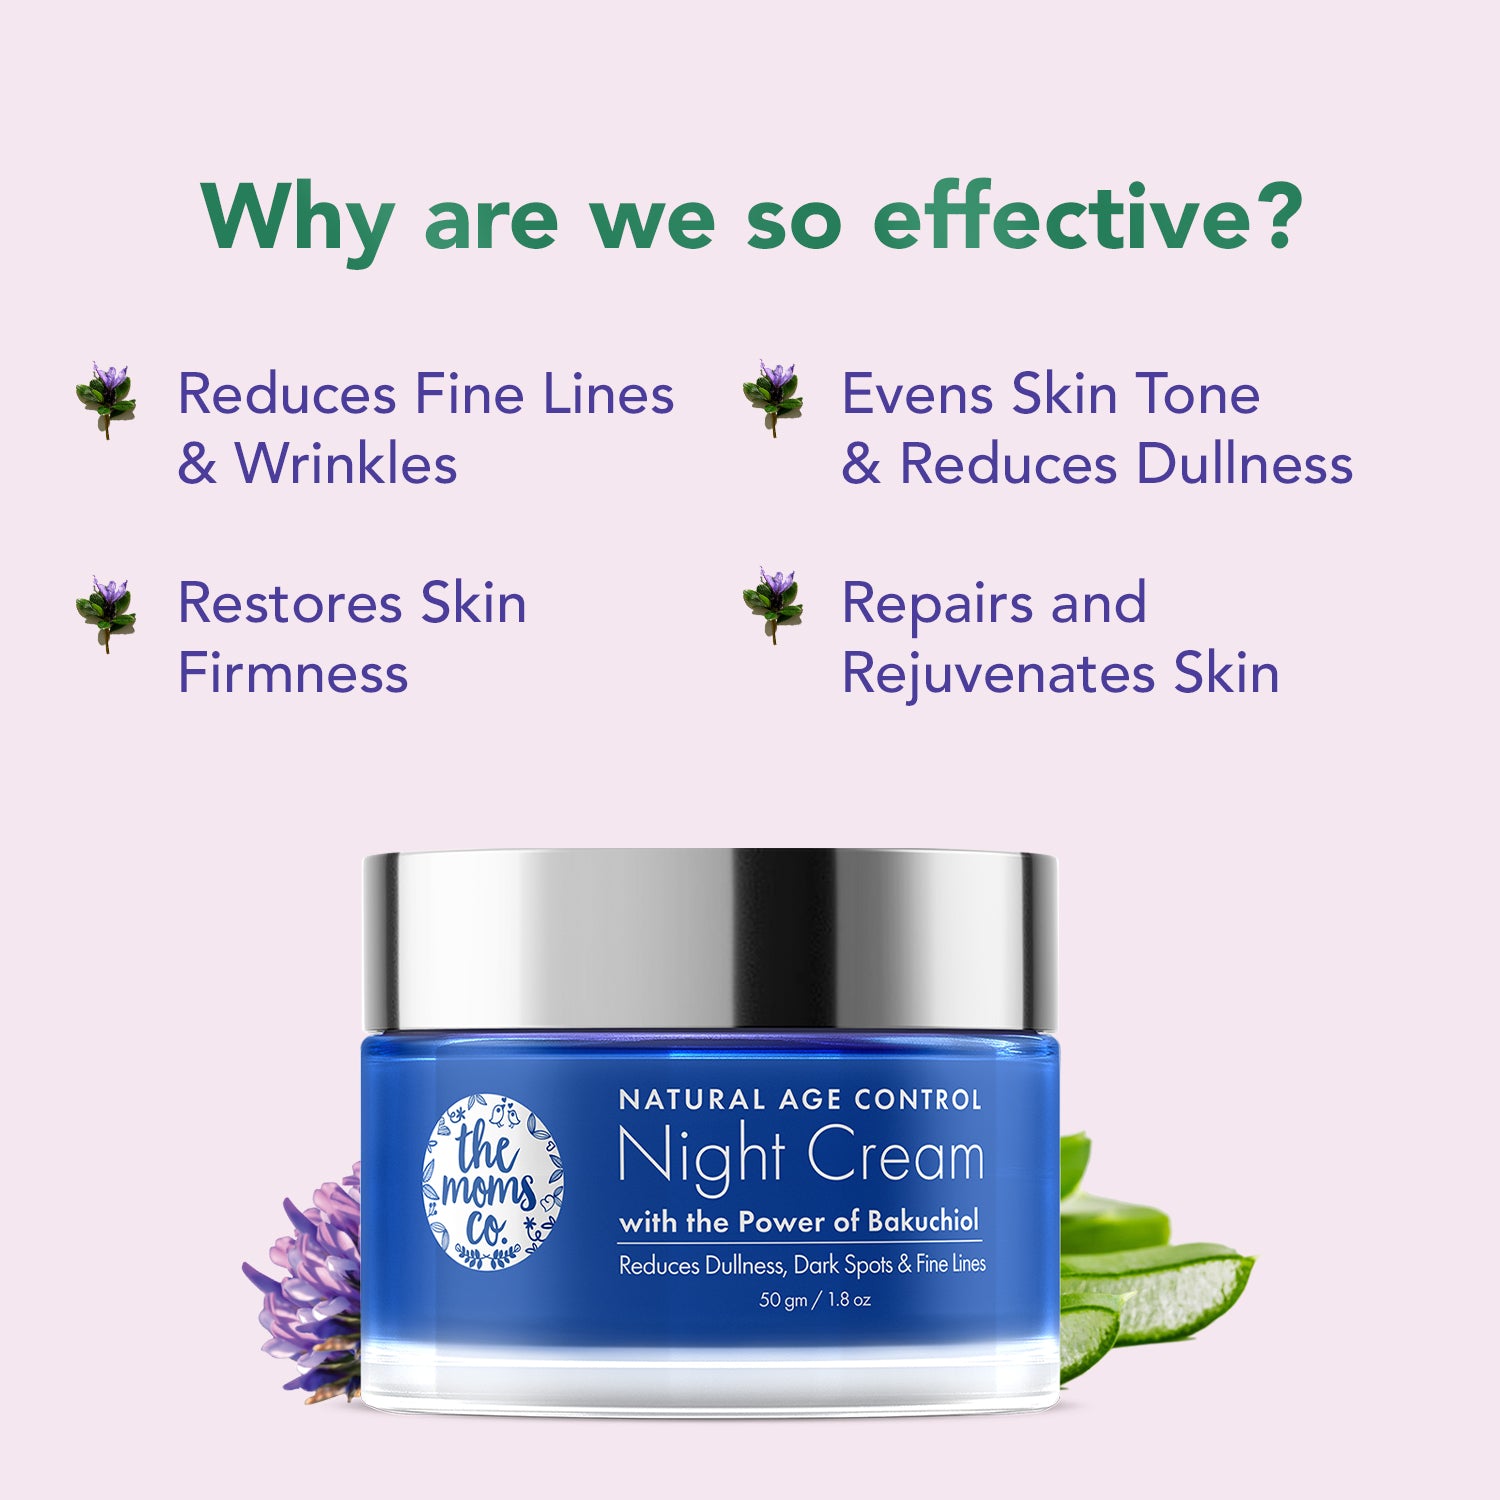 The Moms Co Natural Age Control Night Cream | Face Cream for Women & Men | Reduce Fine Lines & Wrinkles | Anti Ageing Cream | Wrinkle Lift Anti Ageing Cream | Cream for Dry Skin & Oily Skin-50 gm